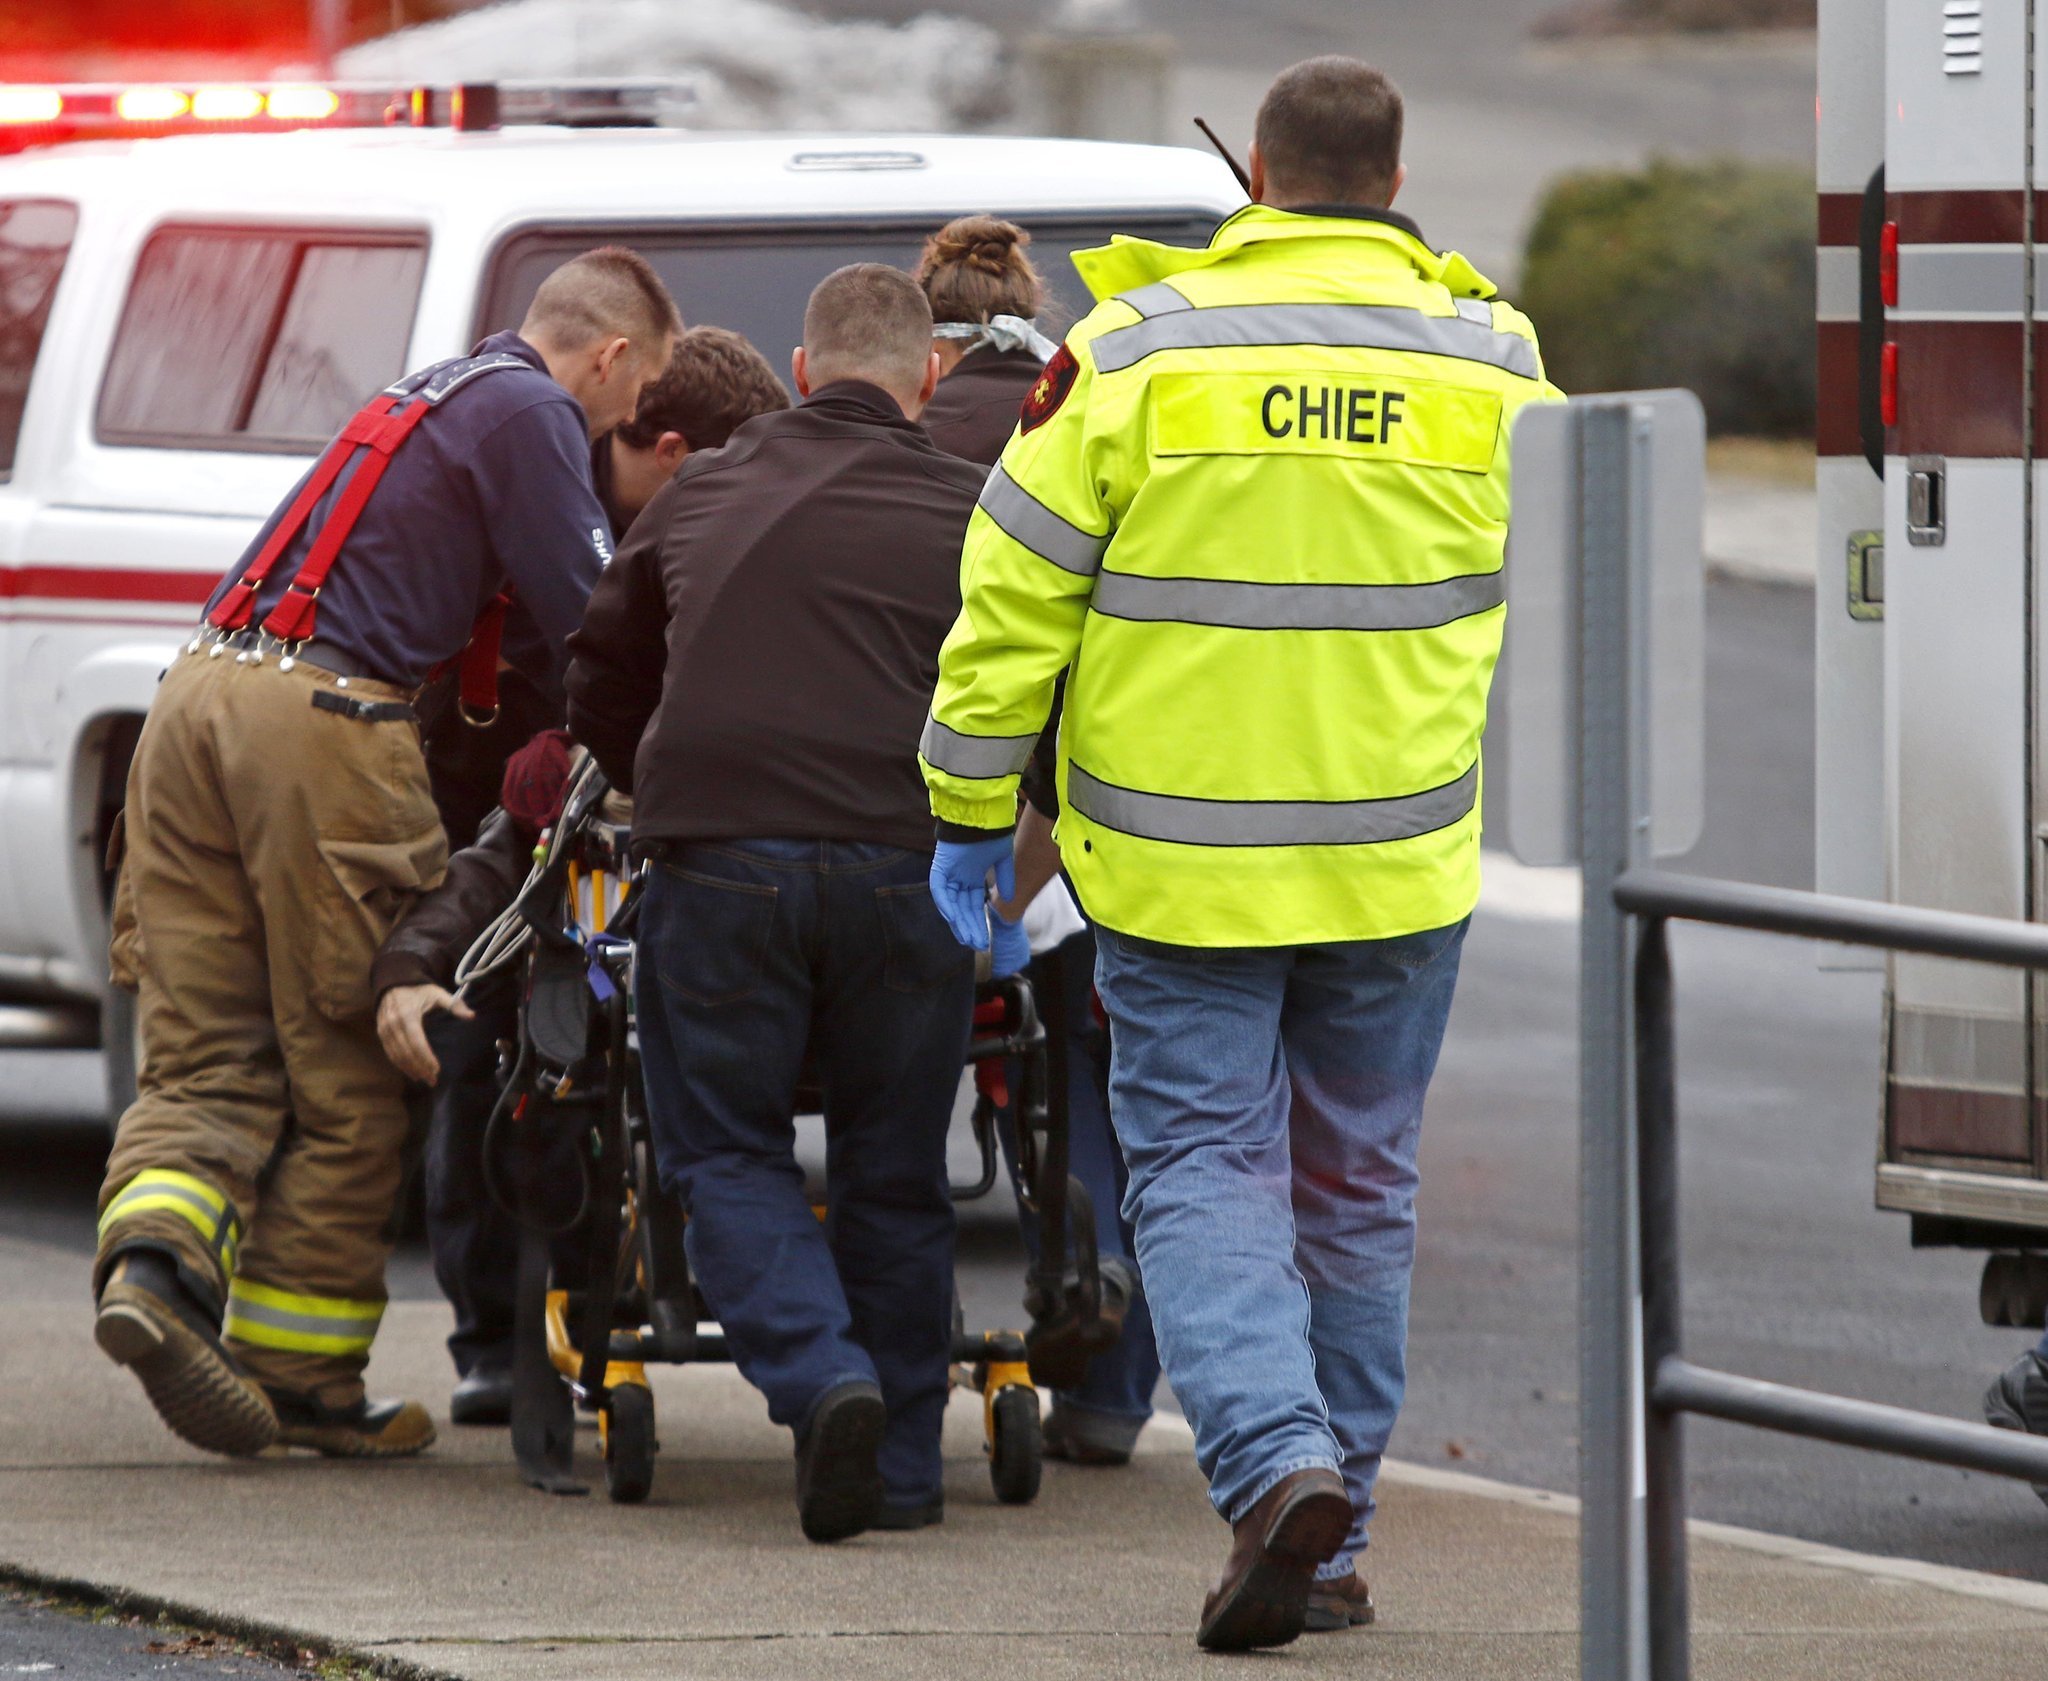 Gunman kills 3, critically wounds another in Idaho shooting spree - Chicago Tribune2048 x 1681